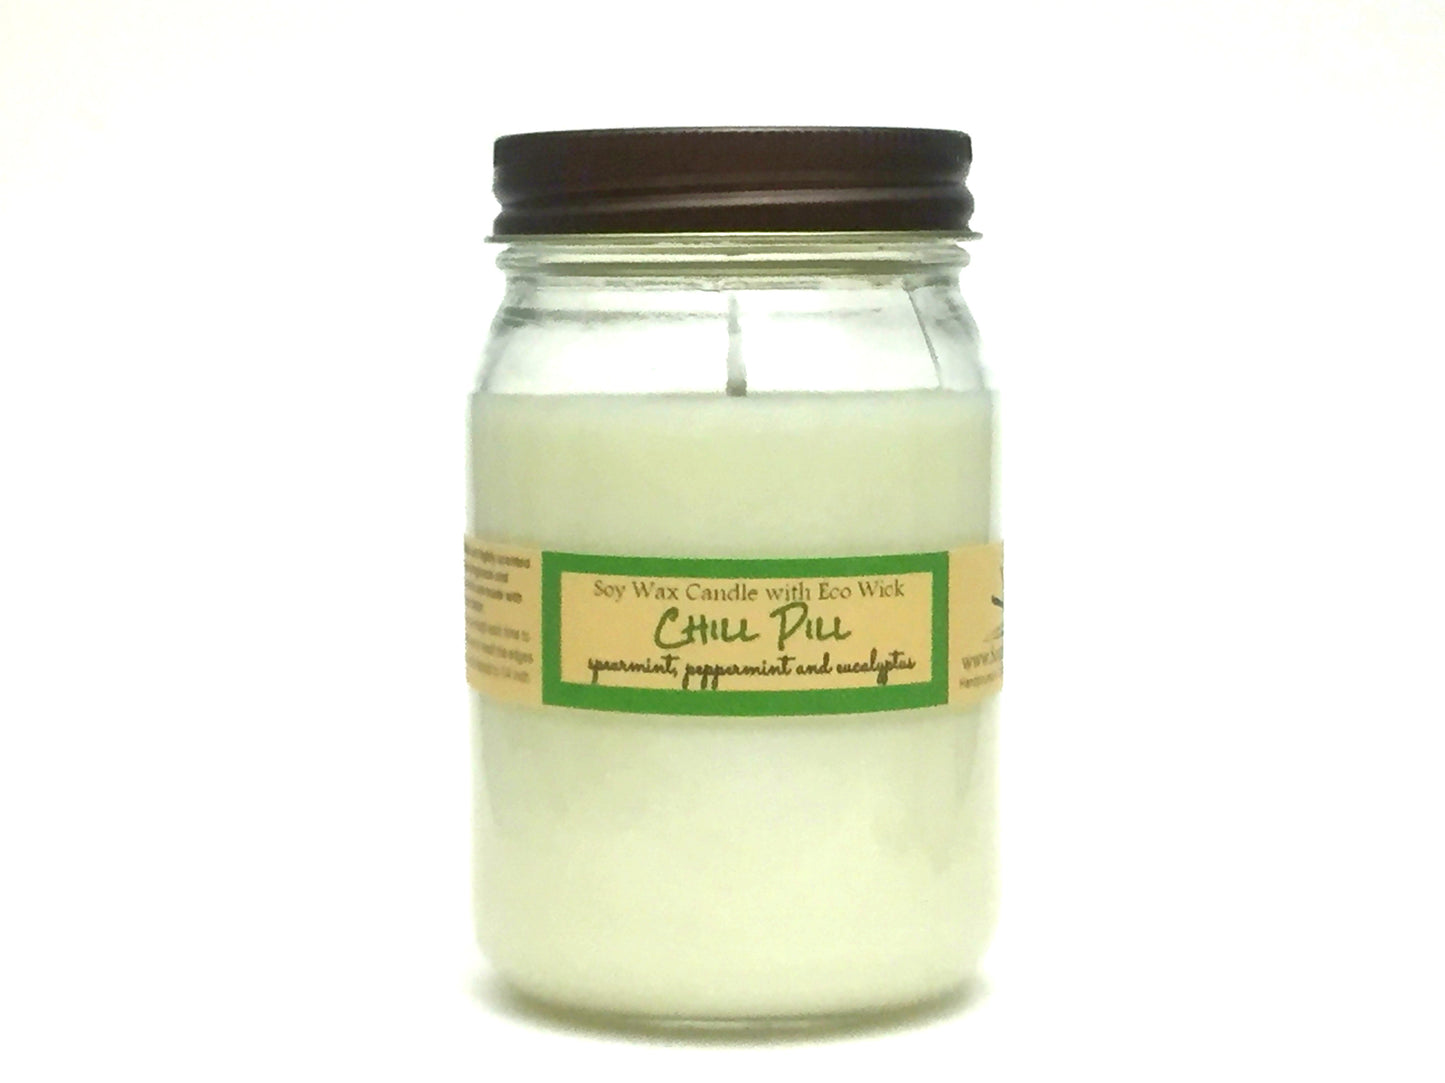 Chill Pill Scented Soy Wax Candle